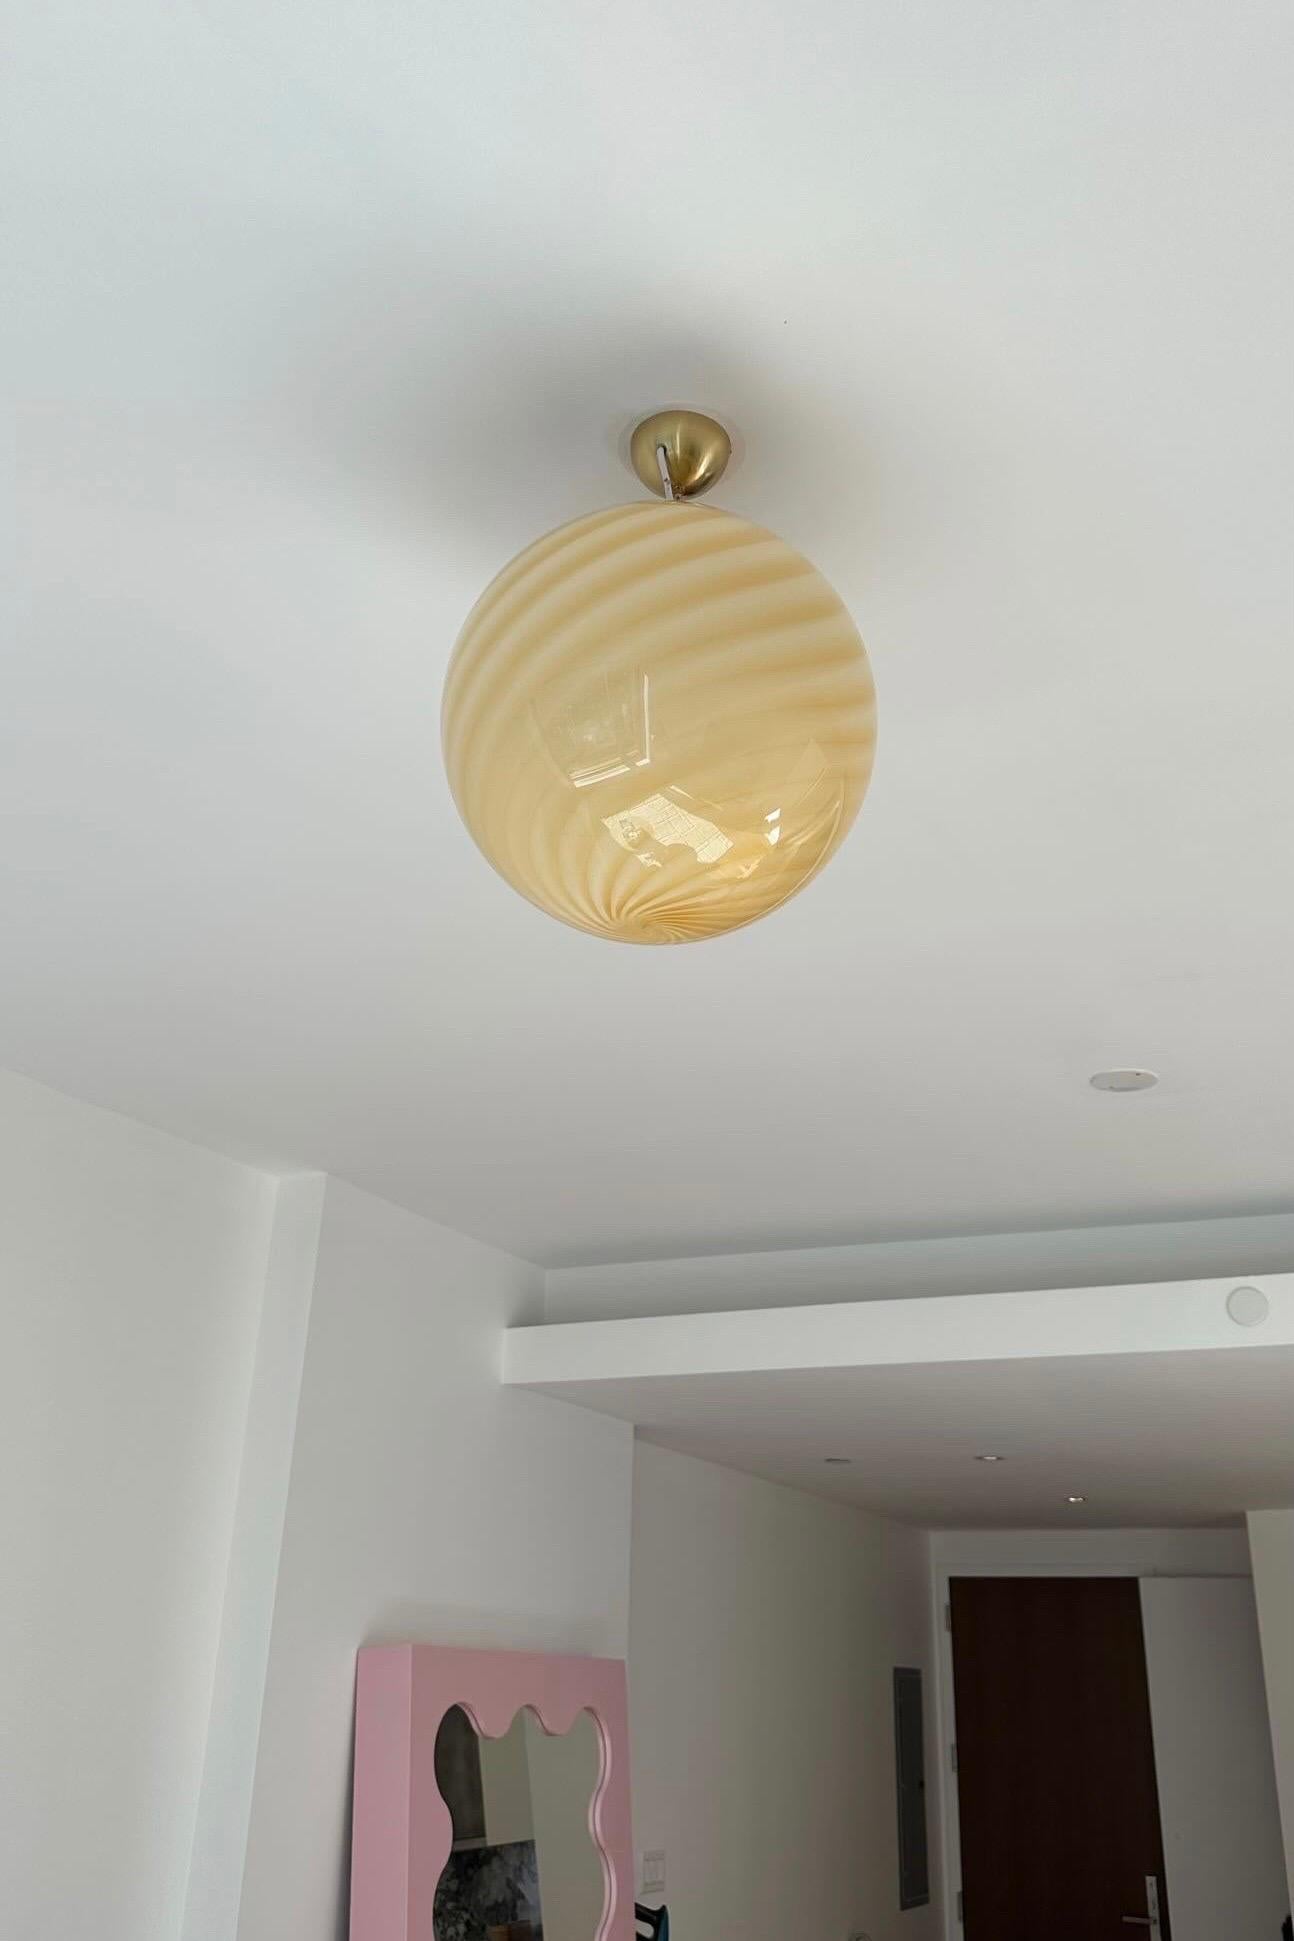 Large new Italian Murano candy pendant ceiling lamp in a beautiful soft yellow shade. Mouth-blown glass in round shape with swirl pattern. E27 socket. Comes with adjustable brass plated suspension as well as transparent cord.
Handmade in Italy.
D:40